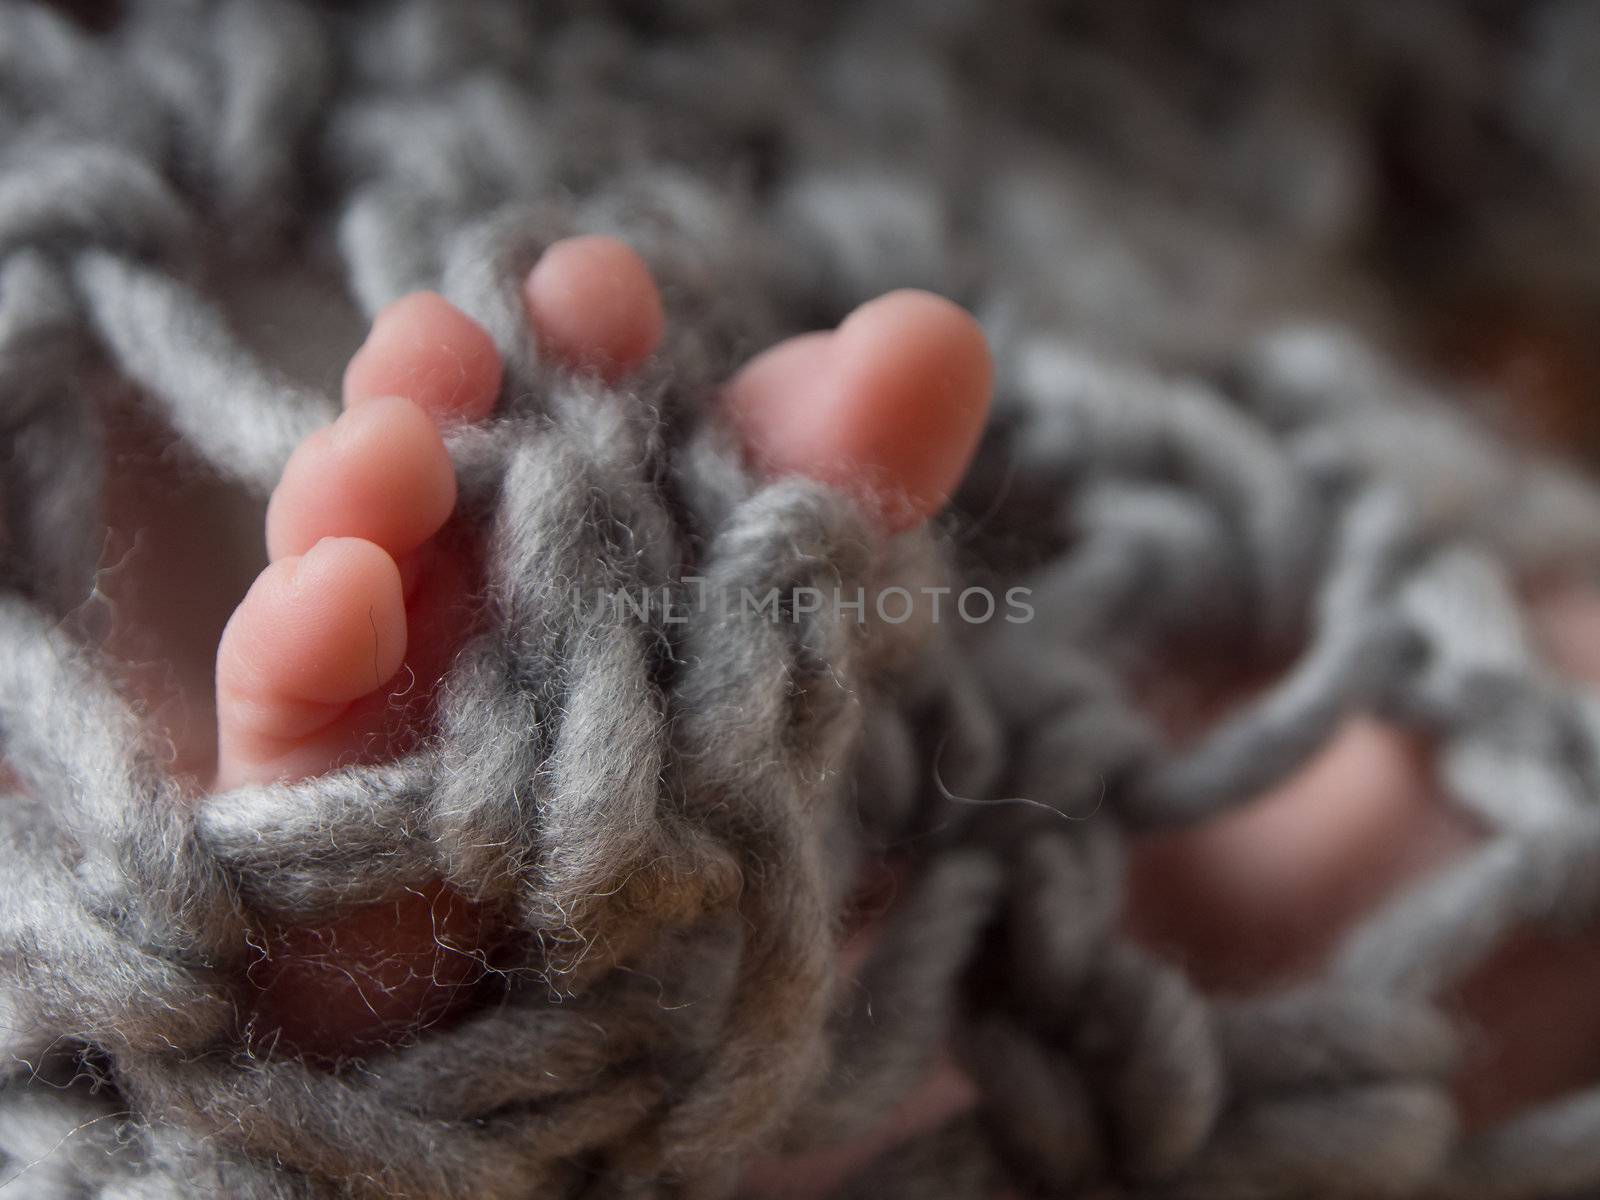 Newborn feets and toes by Talanis